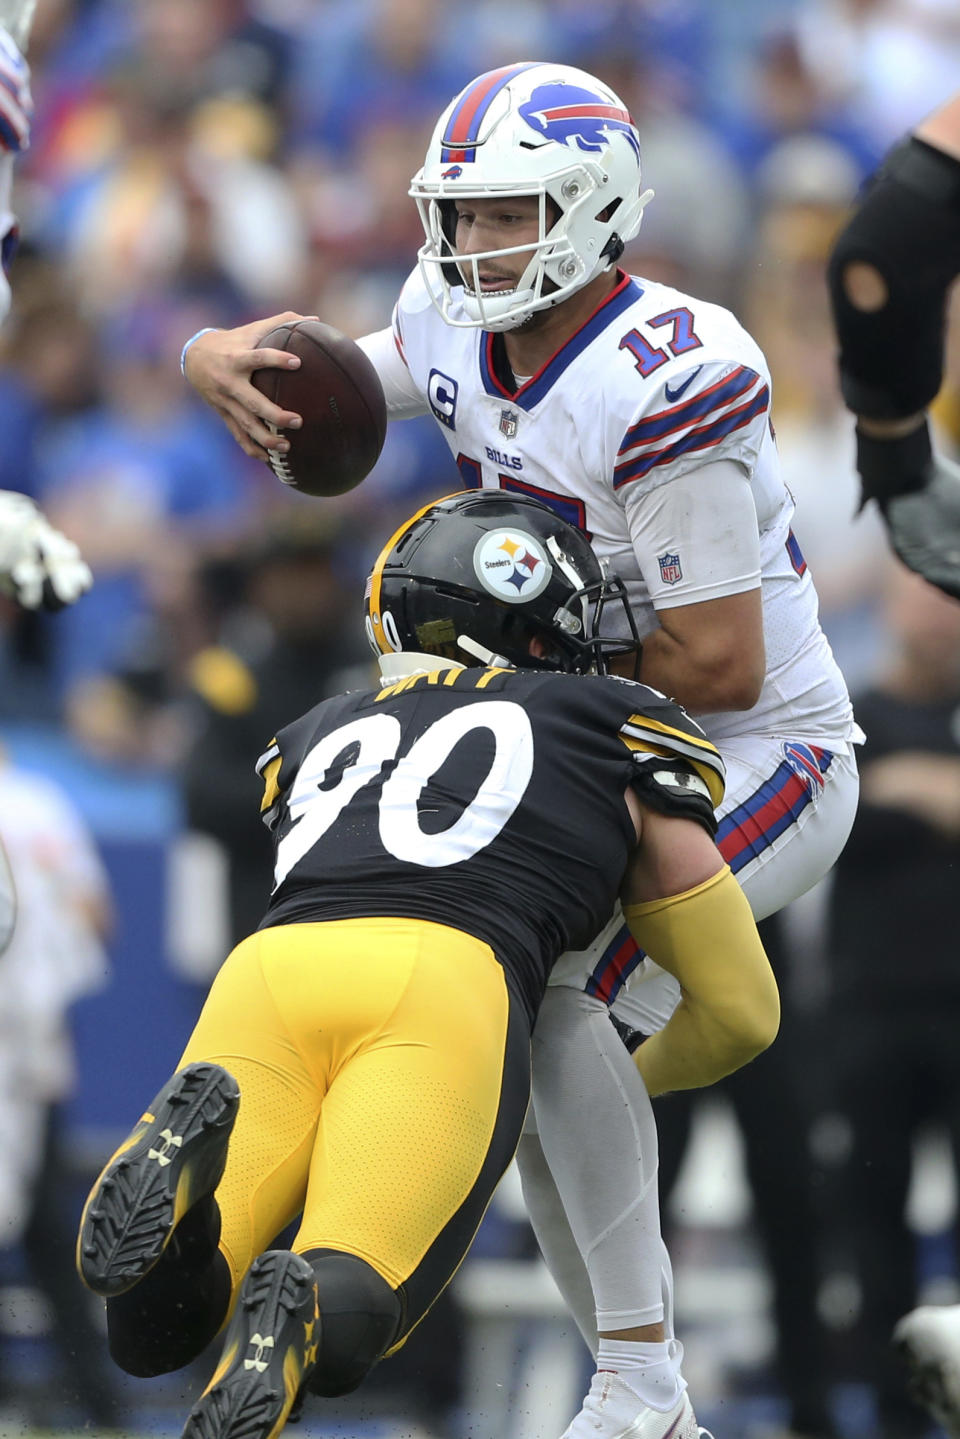 Buffalo Bills quarterback Josh Allen (17) is sacked by Pittsburgh Steelers outside linebacker T.J. Watt during the second half of an NFL football game in Orchard Park, N.Y., Sunday, Sept. 12, 2021. (AP Photo/Joshua Bessex)